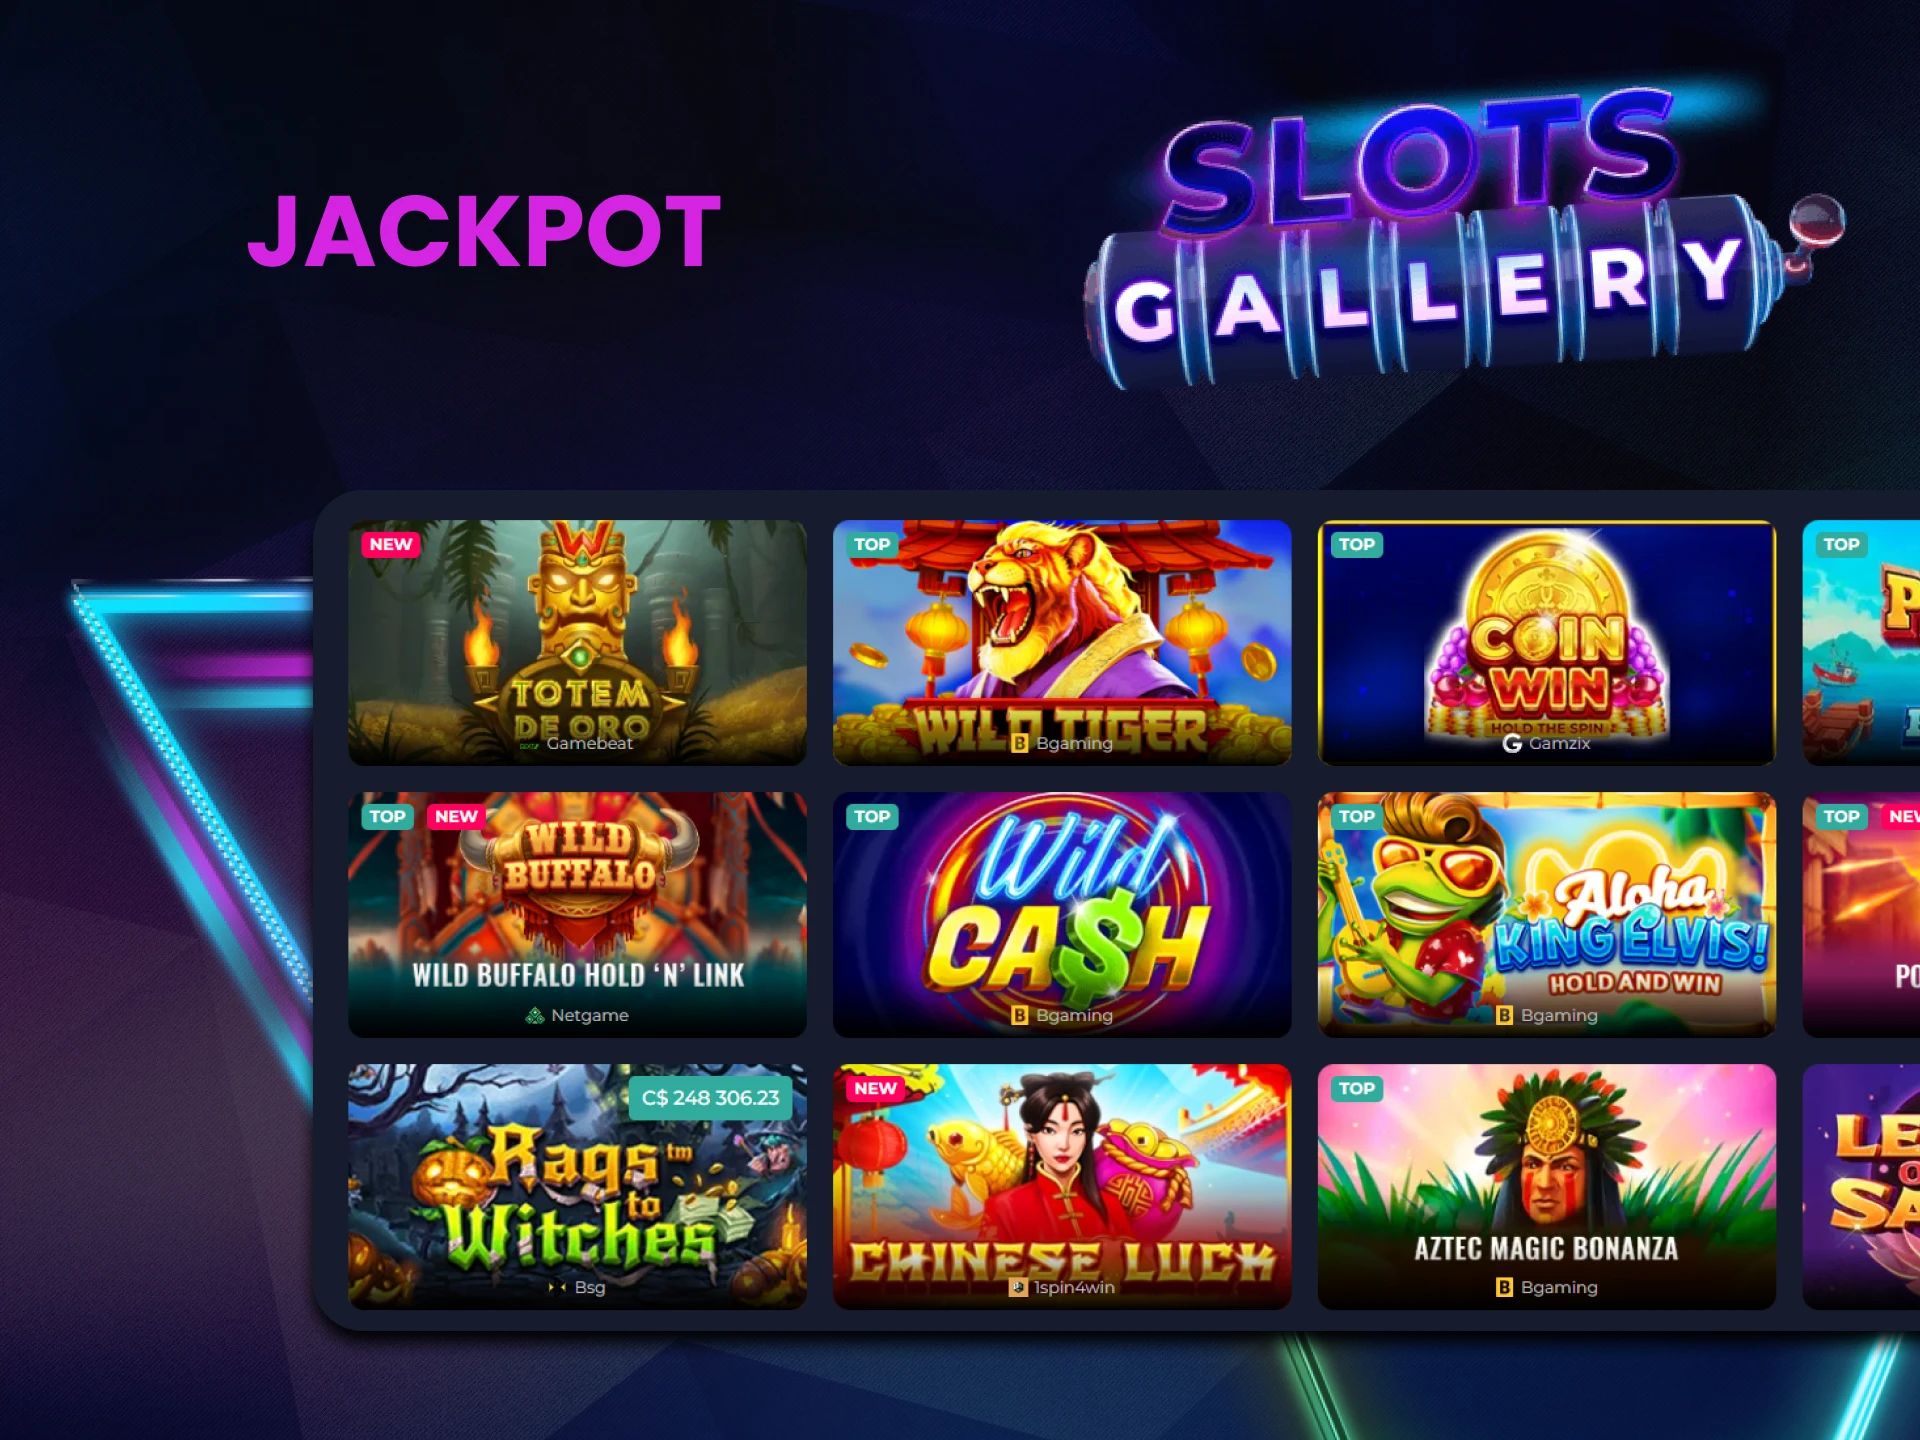 Choose the Jackpot section in the casino from SlotsGallery.